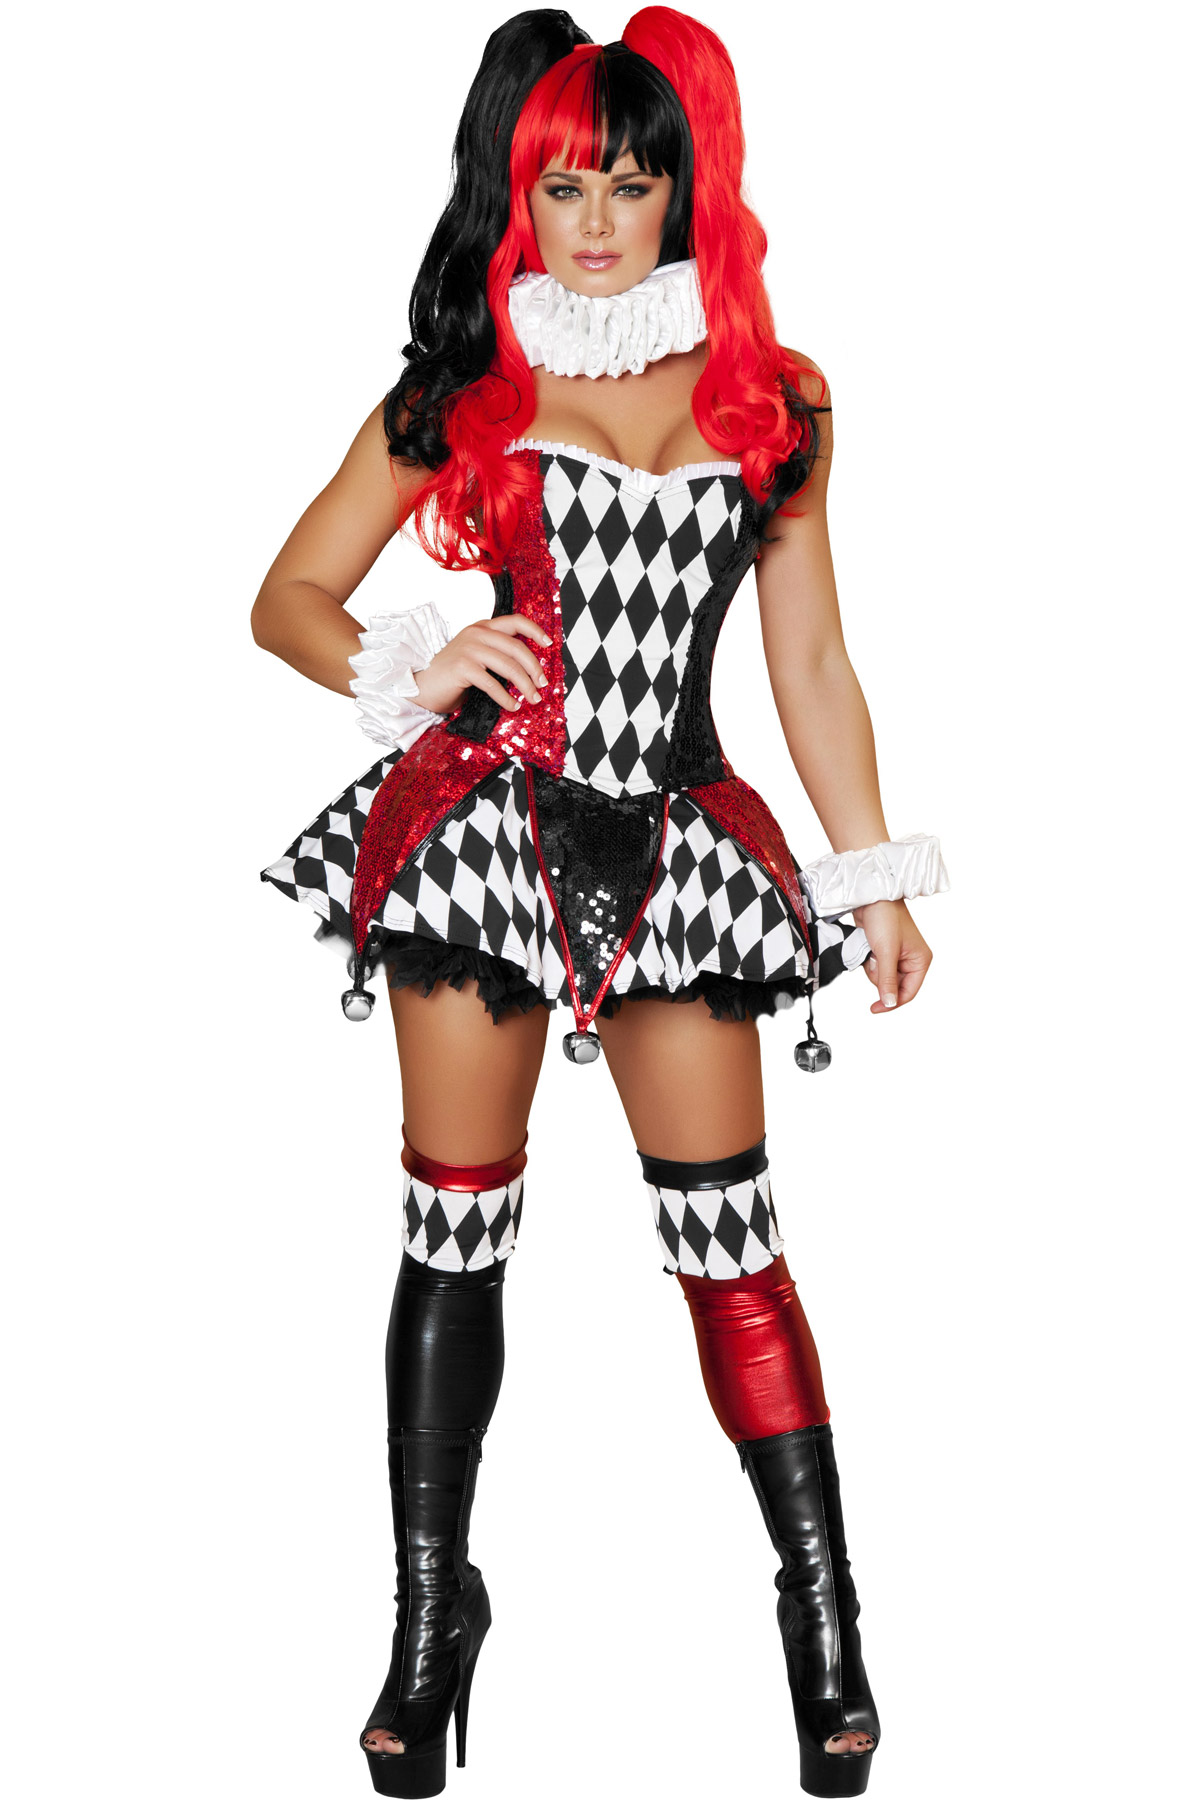 Sexy Adult Women Court Jester Cutie Clown Harlequin Costume Halloween Outfit New Ebay 4032